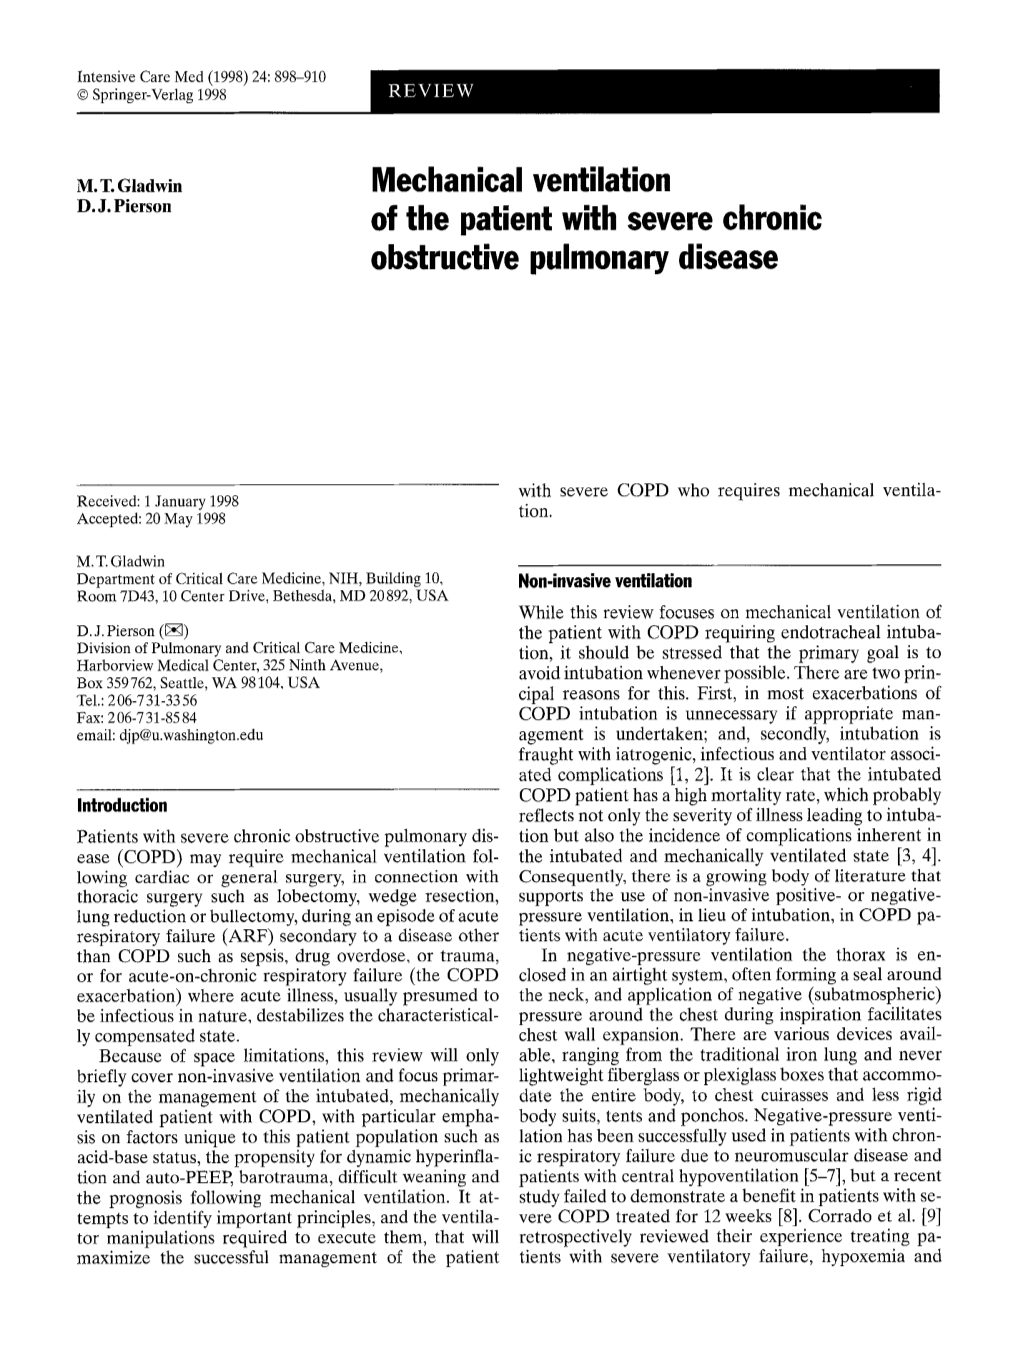 Mechanical Ventilation of the Patient with Severe Chronic Obstructive